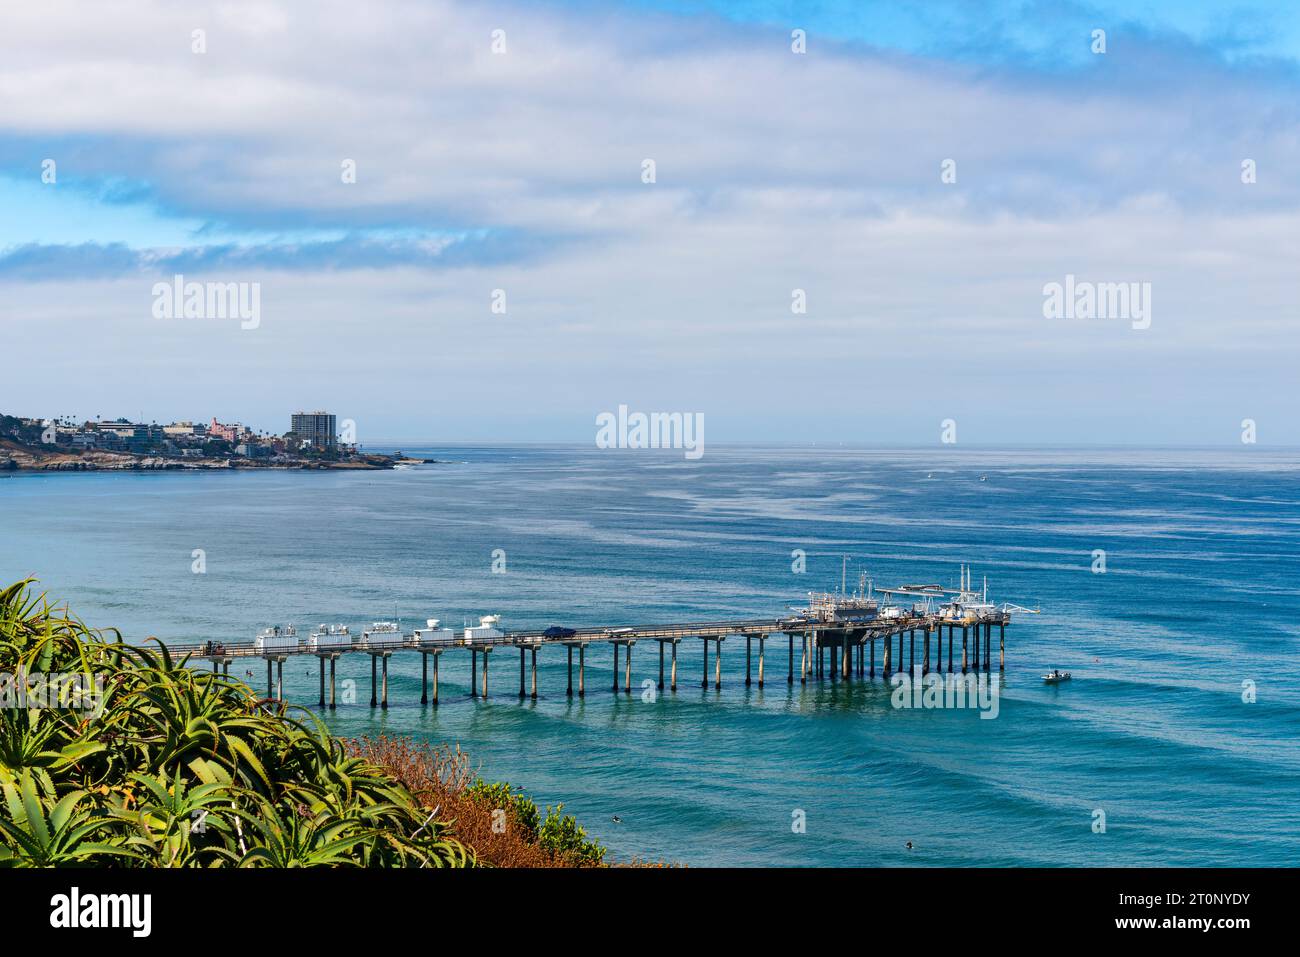 The Pacific Ocean and Scripps Pier (Ellen Browning Scripps Memorial Pier) with the village of La Jolla (San Diego), California, USA, in the distance Stock Photo